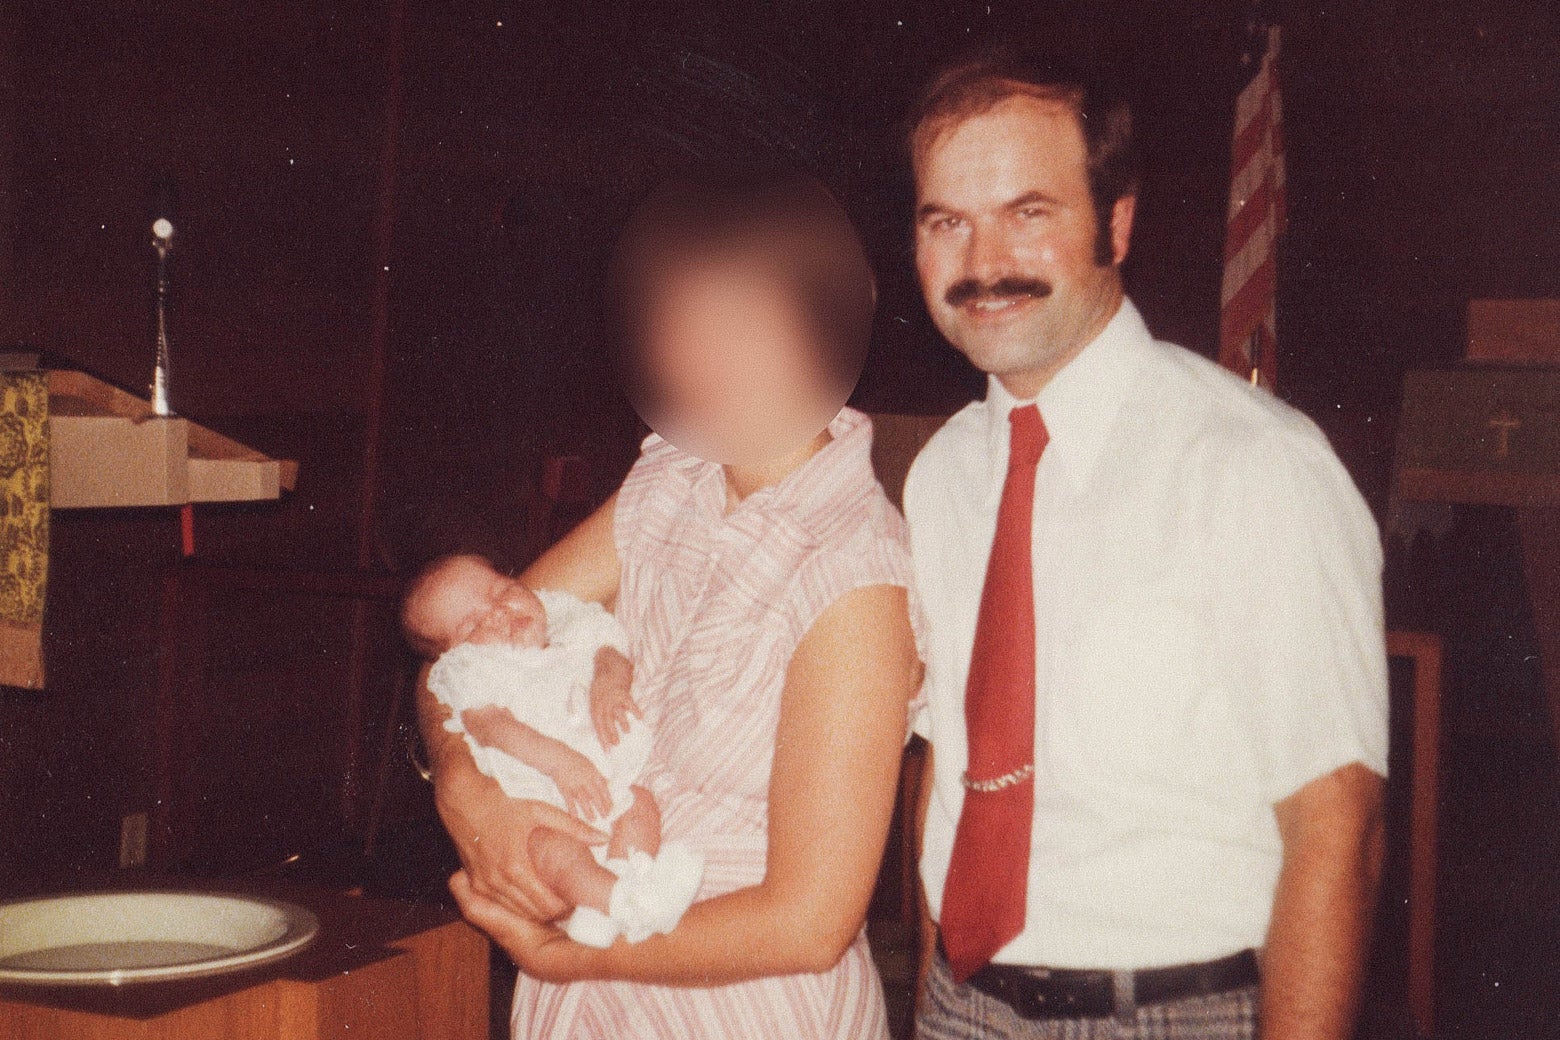 A woman whose face is blurred out holds a baby as the father stands beside her.